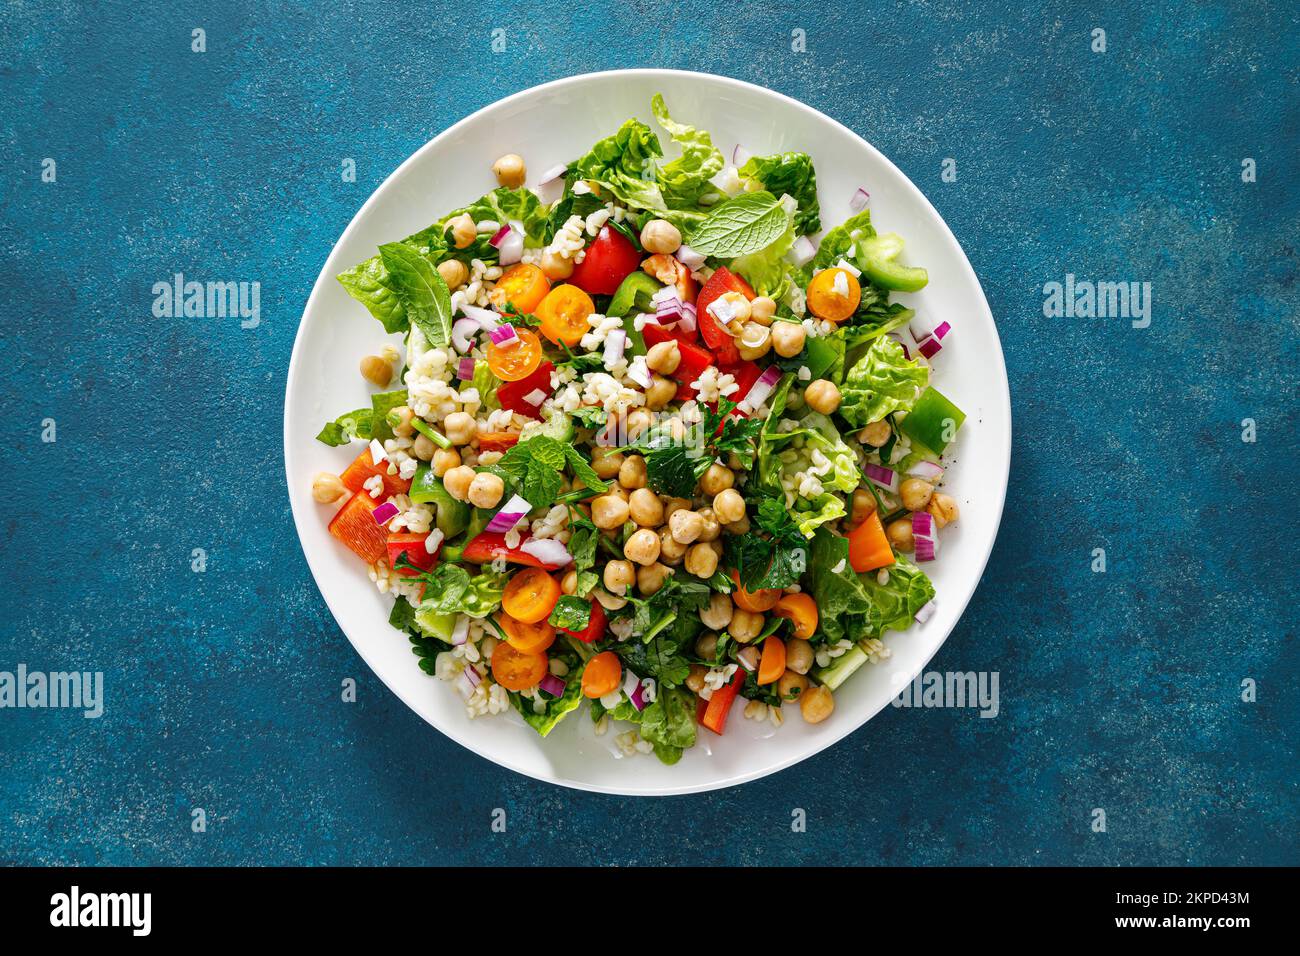 Tabbouleh salad. Tabouli salad with fresh parsley, onions, tomatoes, bulgur and chickpea. Healthy vegetarian food, diet. Top view Stock Photo